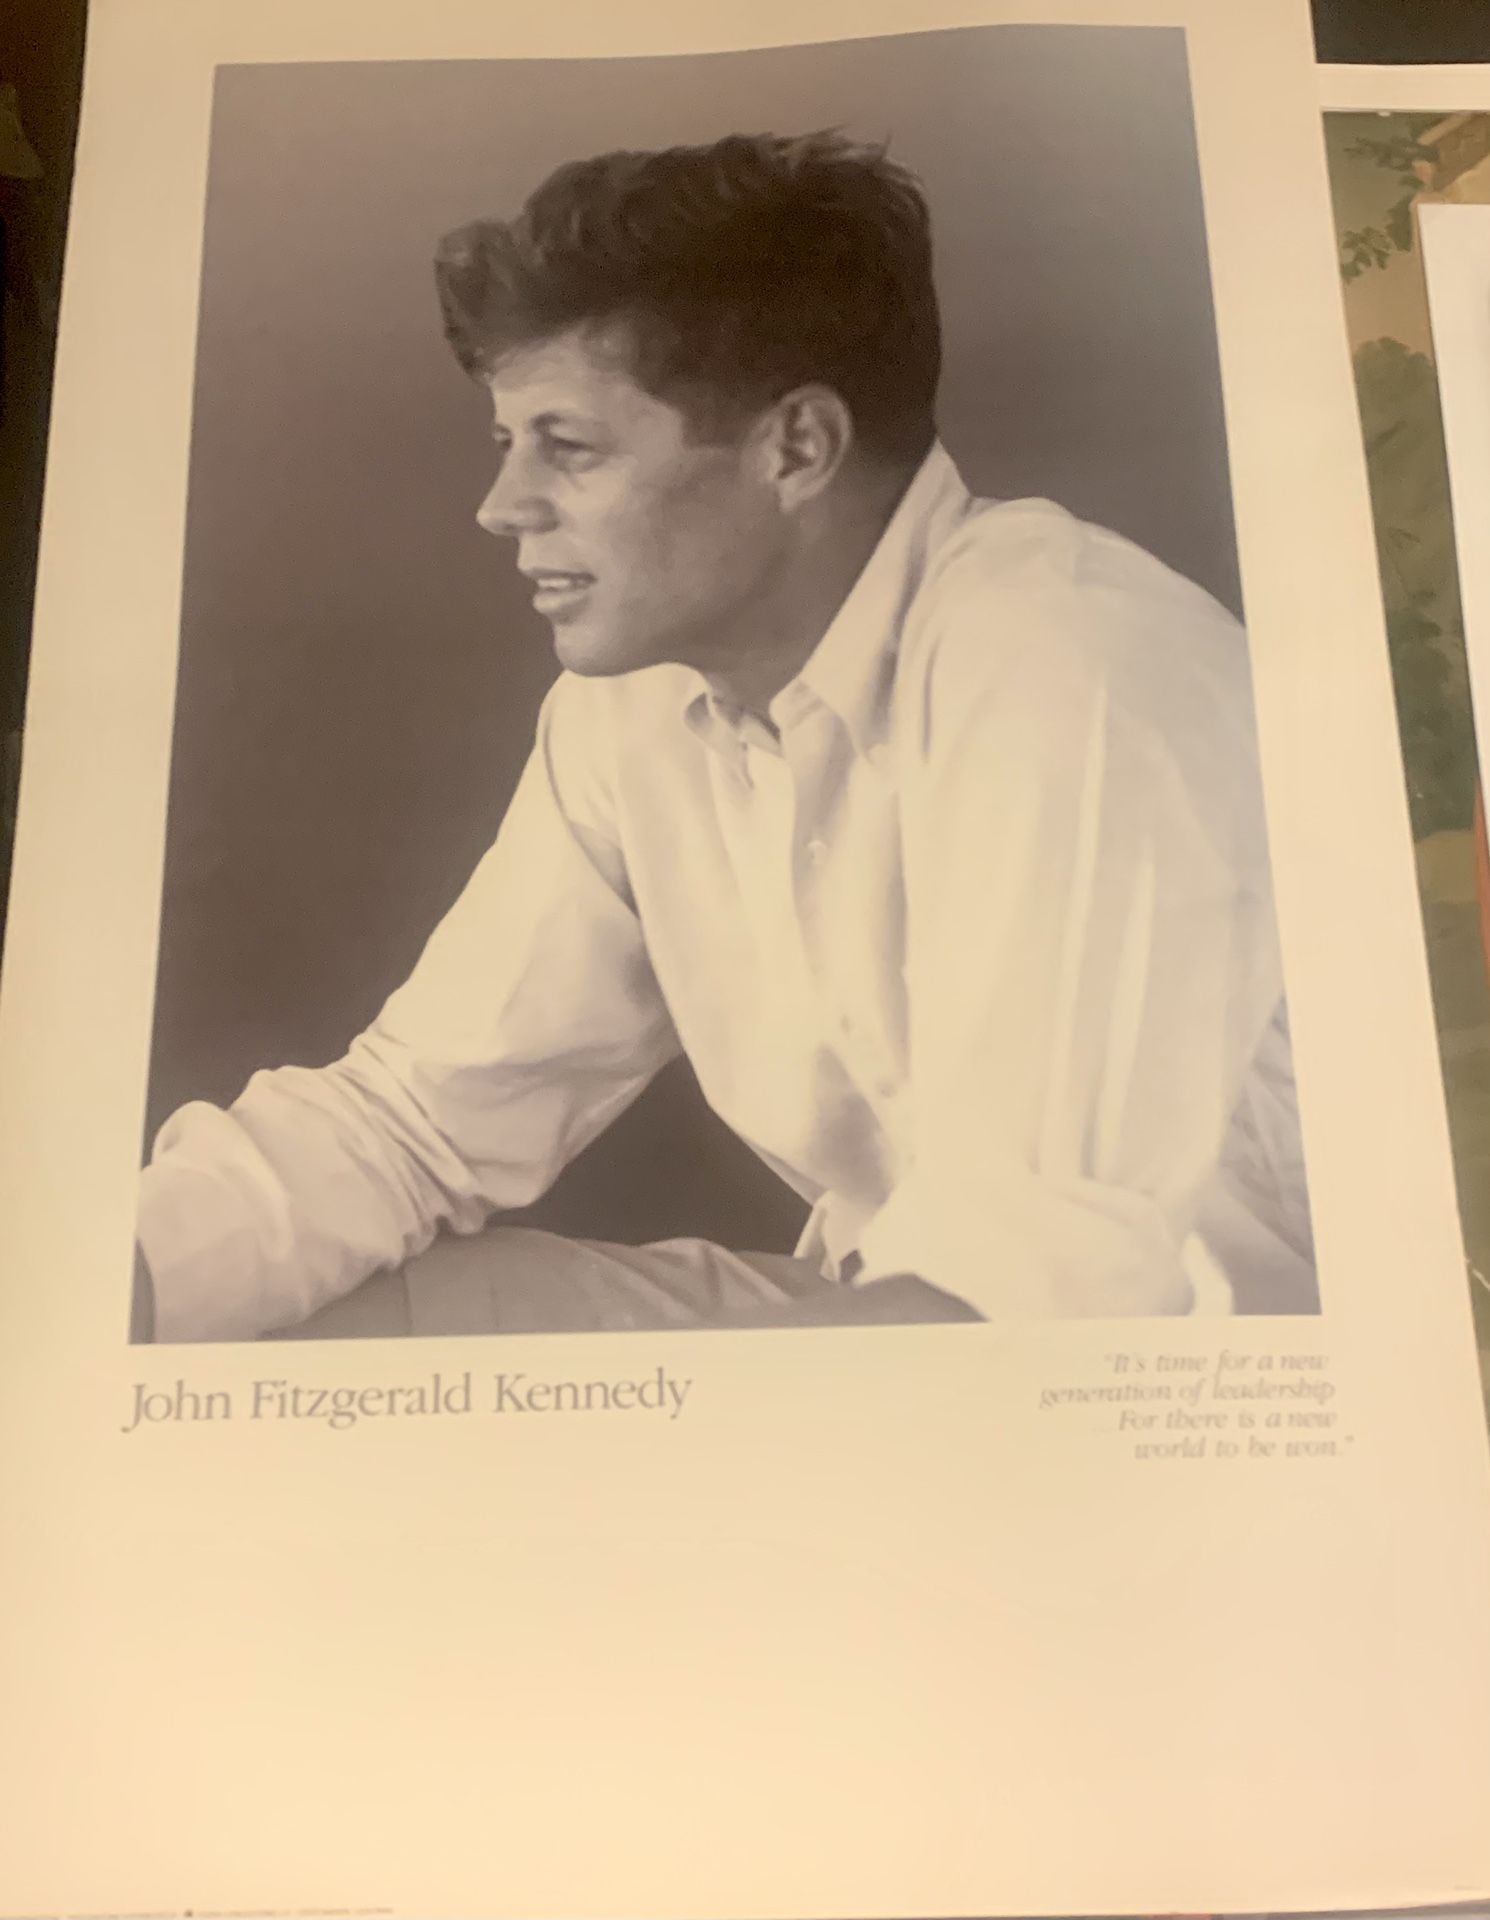 John Fitzgerald Kennedy Poster “It’s time for a new generation of leadership,,,For there is a new world to be won” 24x36” in VG Condition 